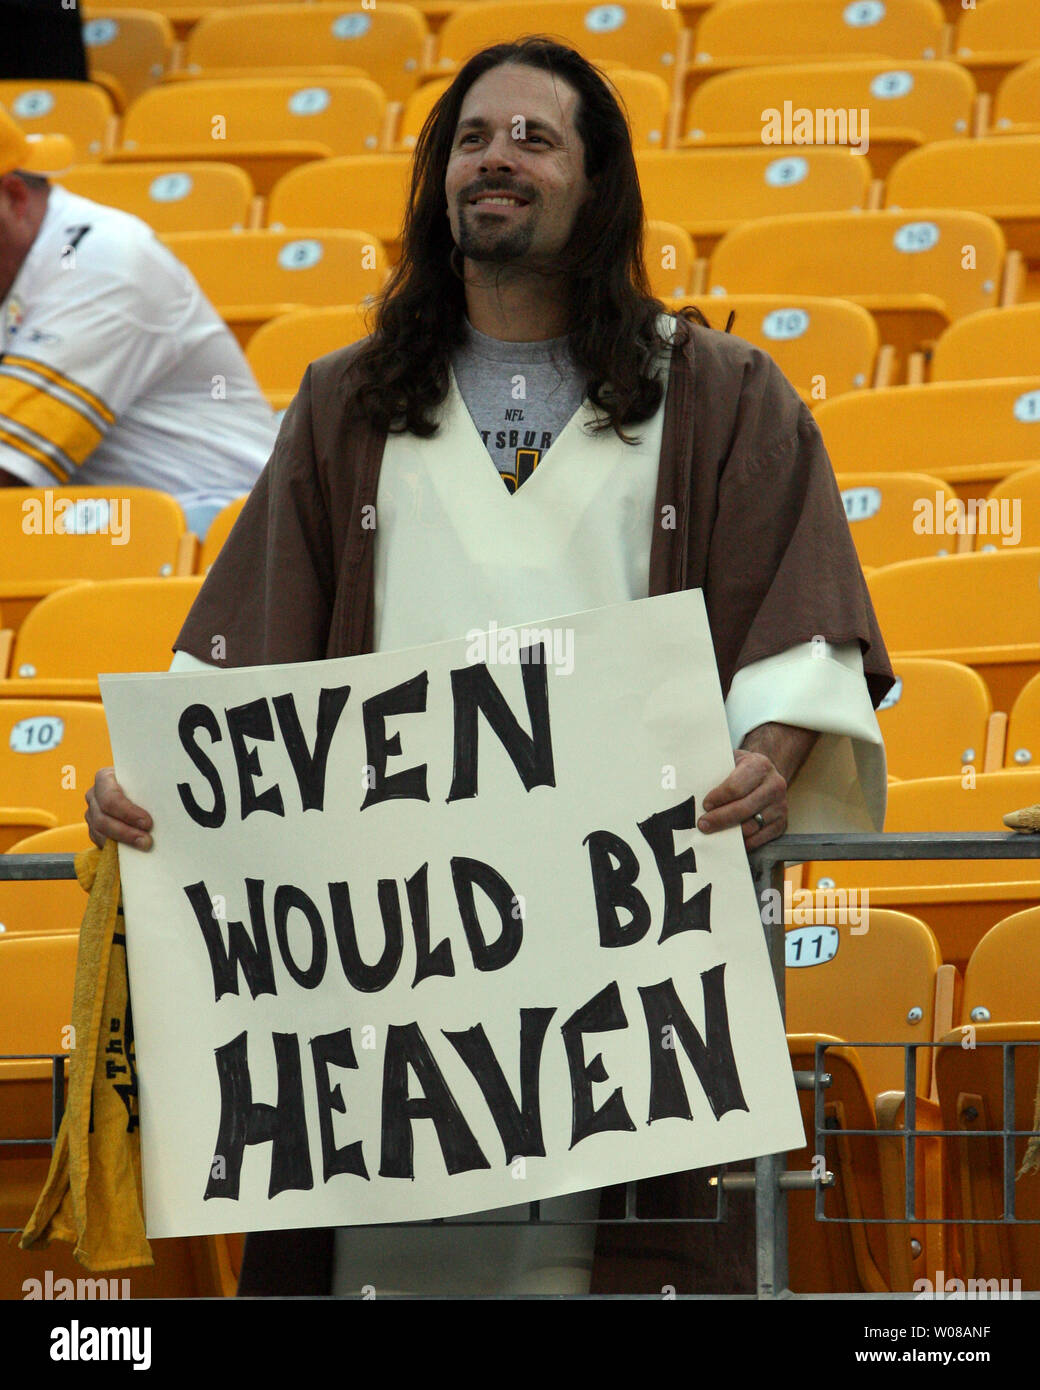 a-pittsburgh-steelers-fan-dressed-as-jesus-holds-a-sign-up-before-the-start-of-the-game-against-the-tennessee-titans-at-heinz-field-during-on-september-10-2009-upi-photostephen-gross-W08ANF.jpg